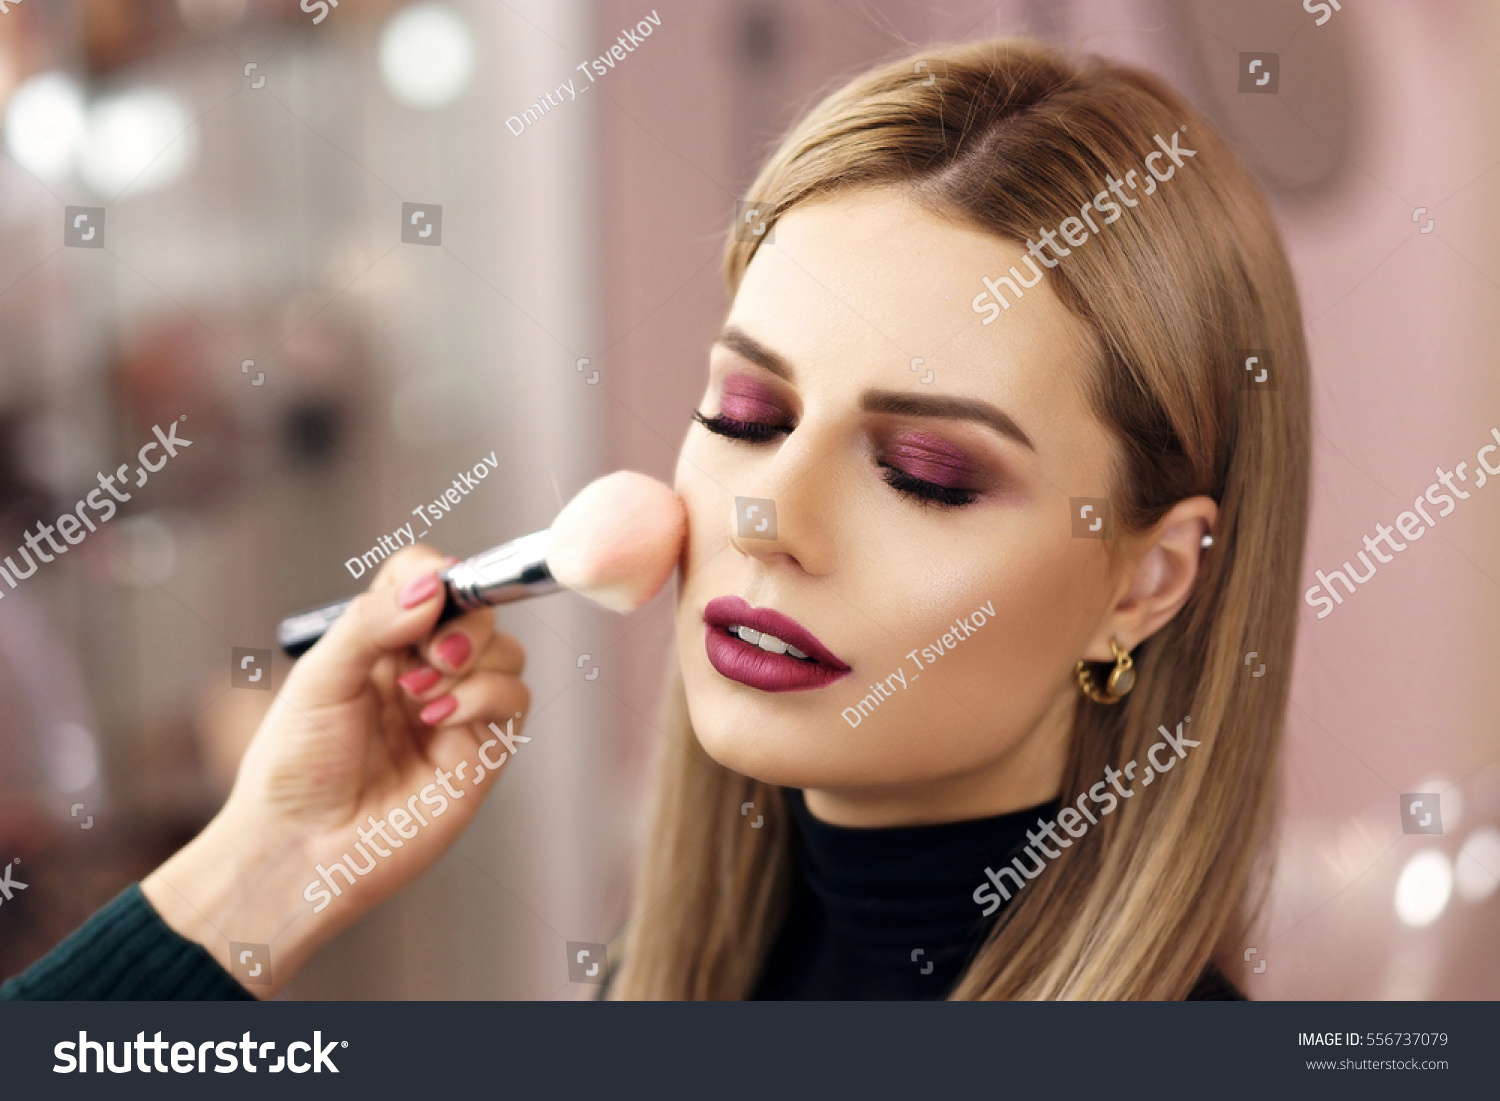 Process of making makeup. Make-up artist working with brush on model face. Portrait of young blonde woman in beauty saloon interior. Applying tone to skin. #556737079